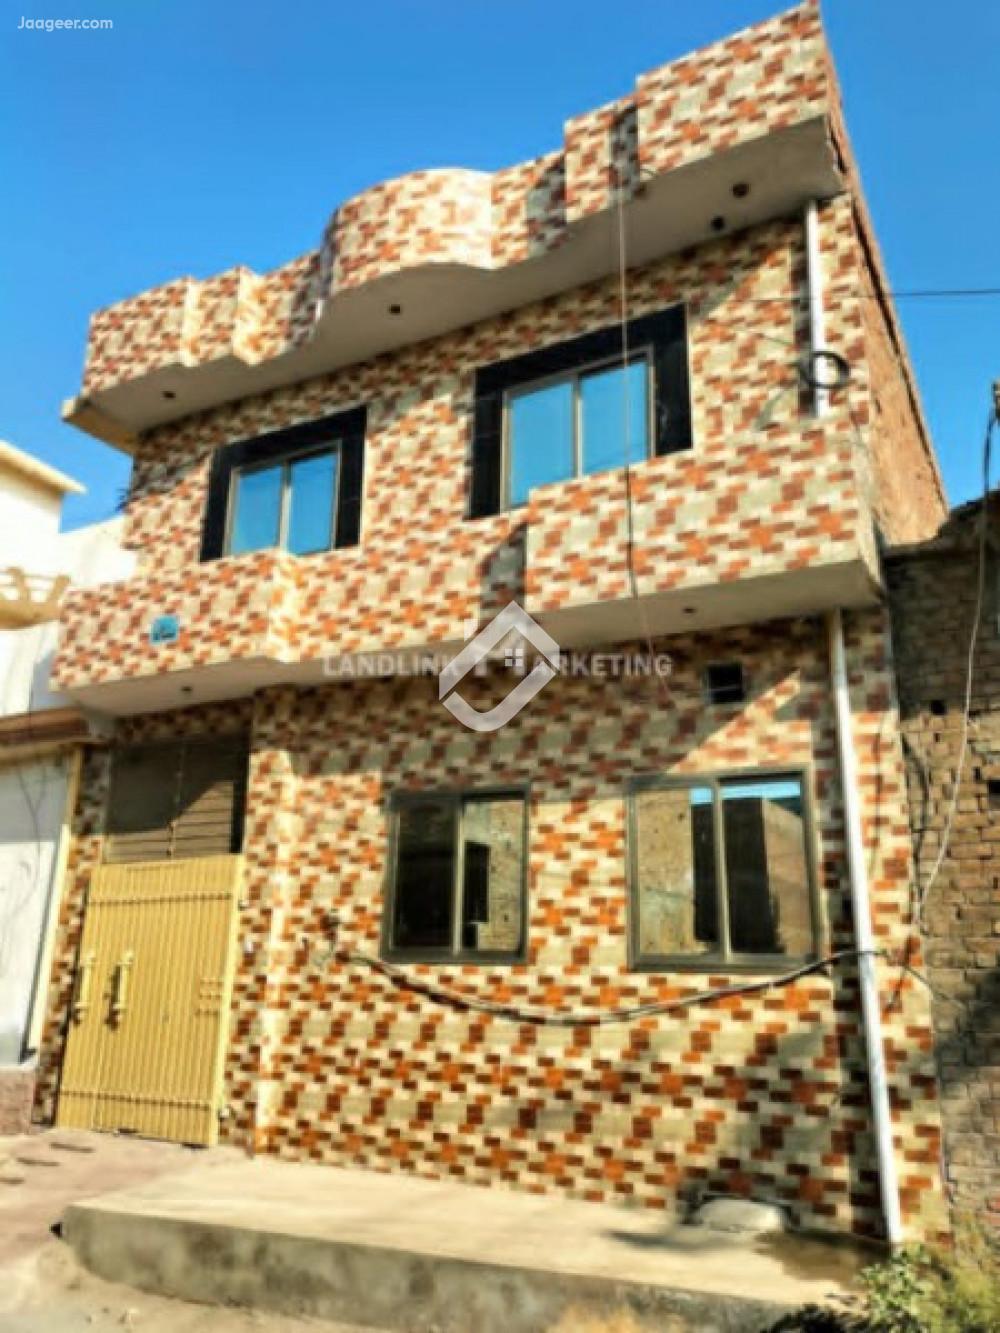 Main image 3 Marla House For Sale In Abdullah Town 49 Tale Road